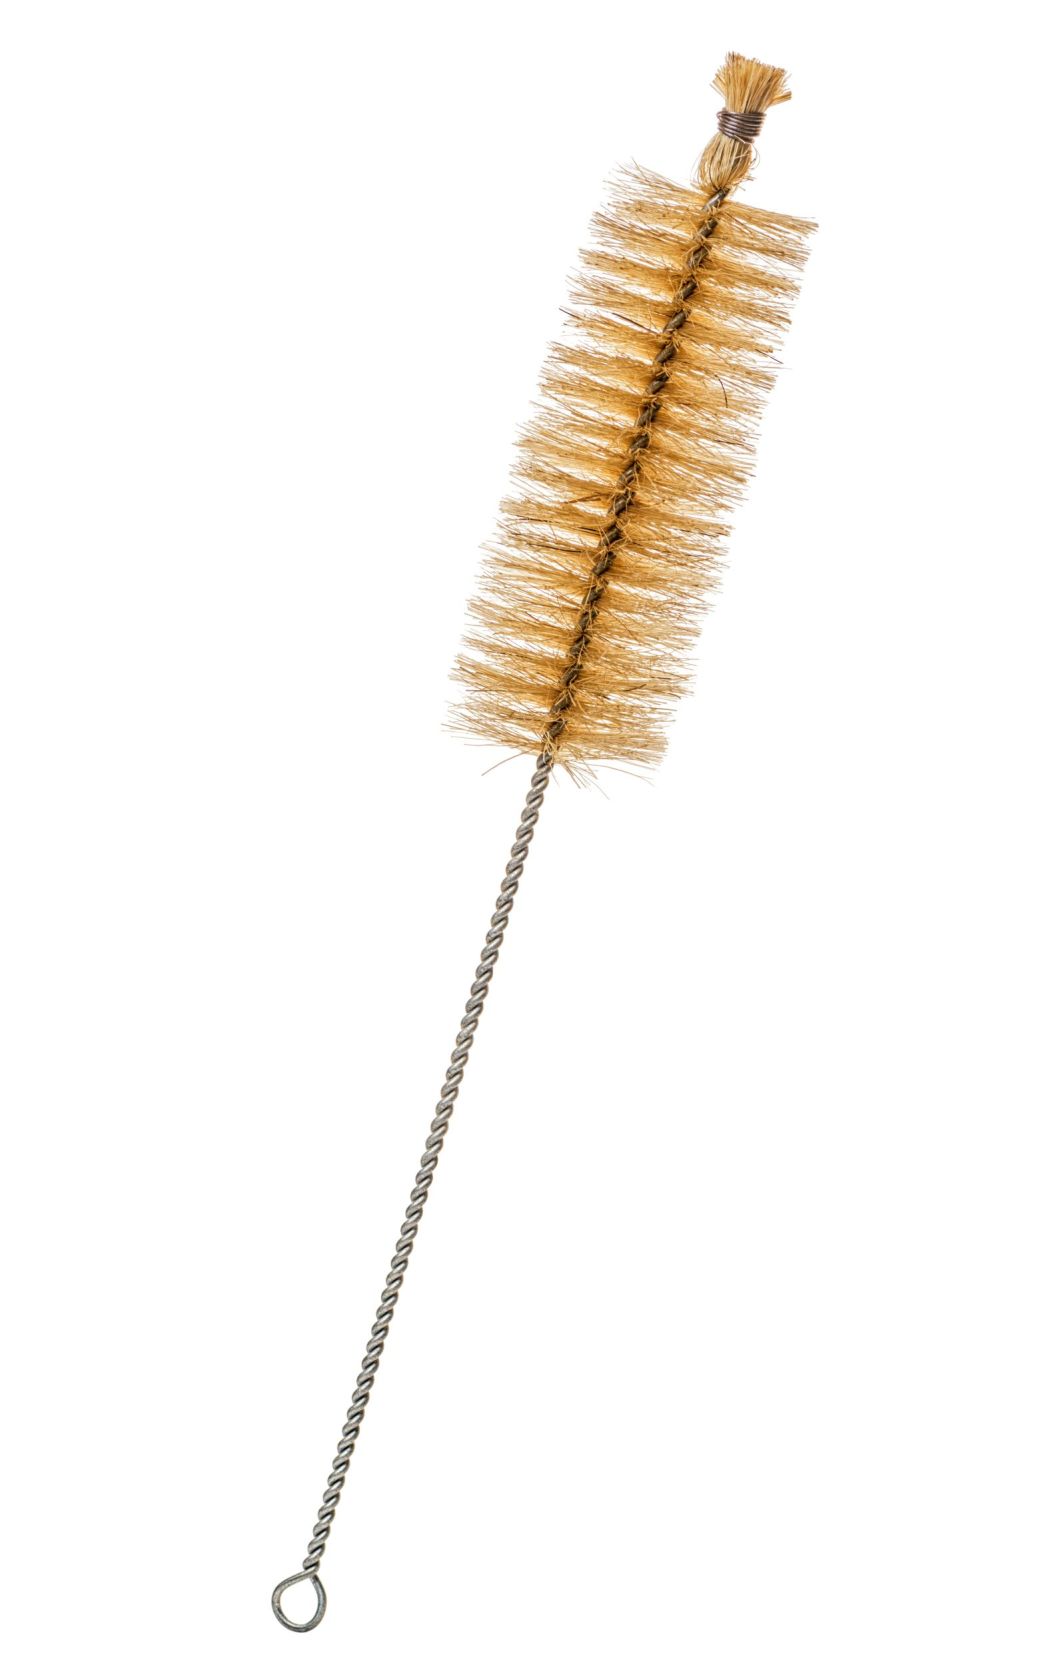 Nylon Cylinder Brush 4mm with Loop